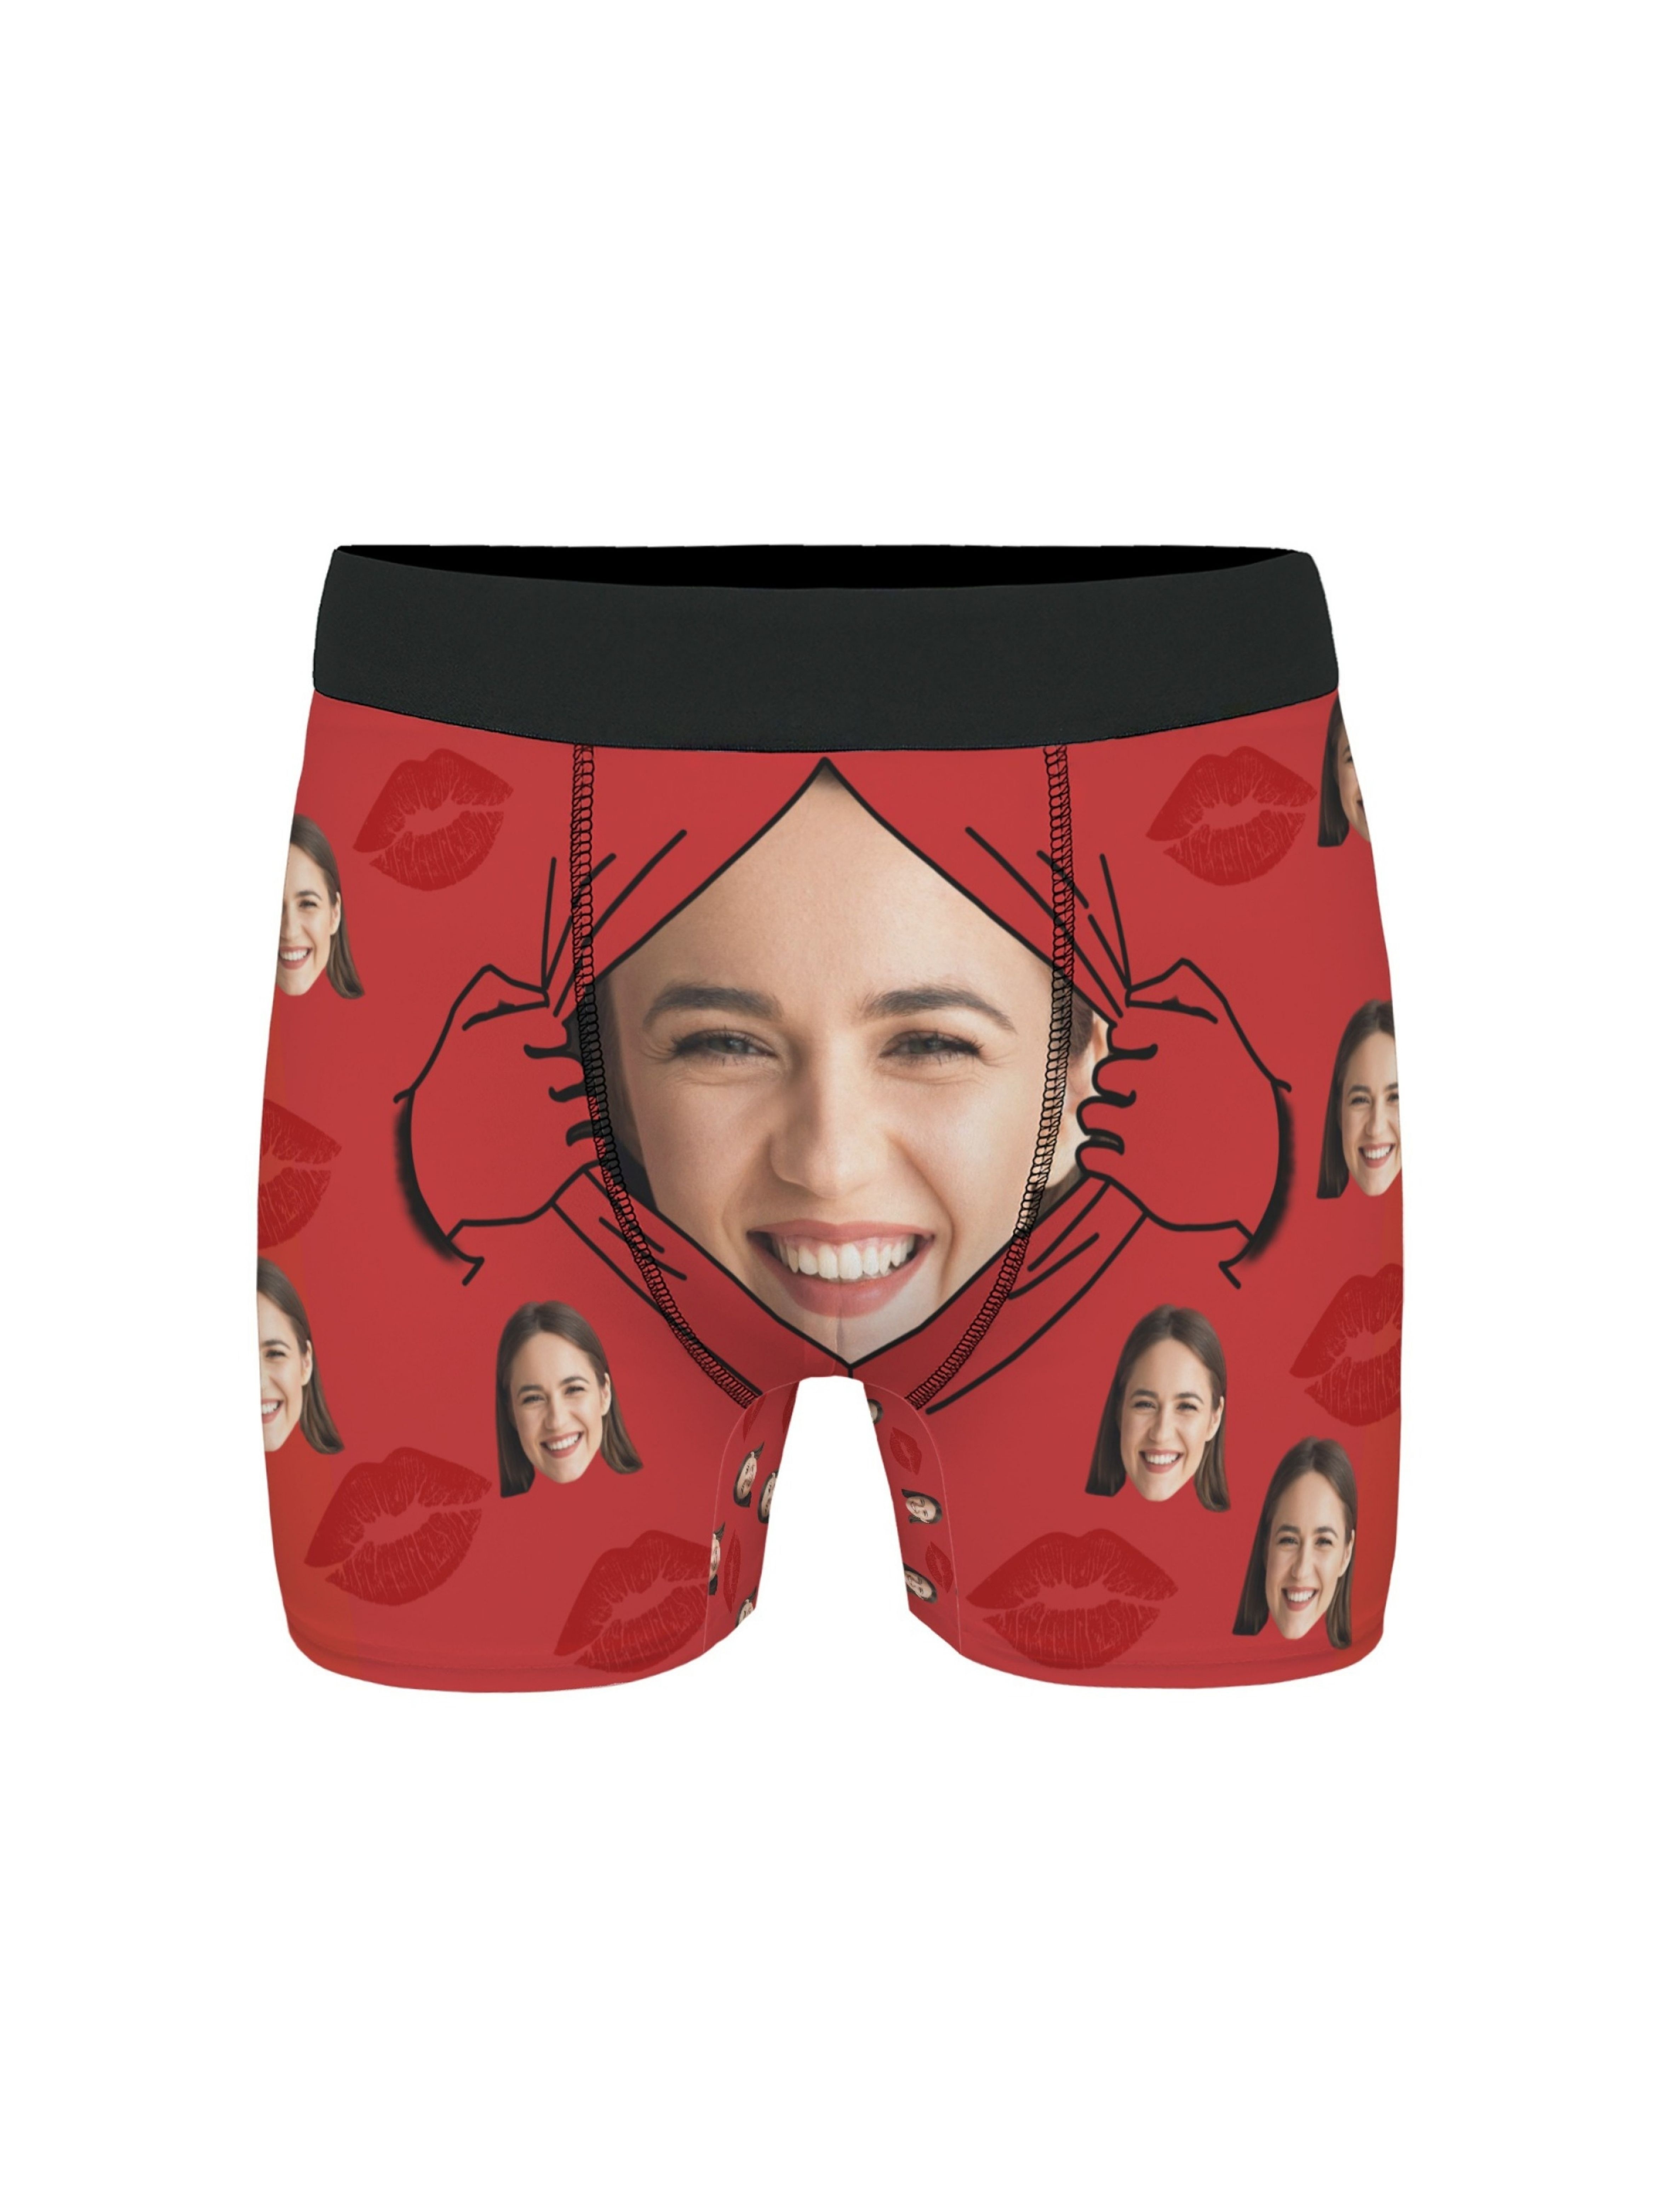 Personalized Boxer Briefs For Men, Custom Face Lip Pattern Boxer Briefs  Gifts For Boyfriend, Valentines Gift For Husband, Funny Personalized  Underwear